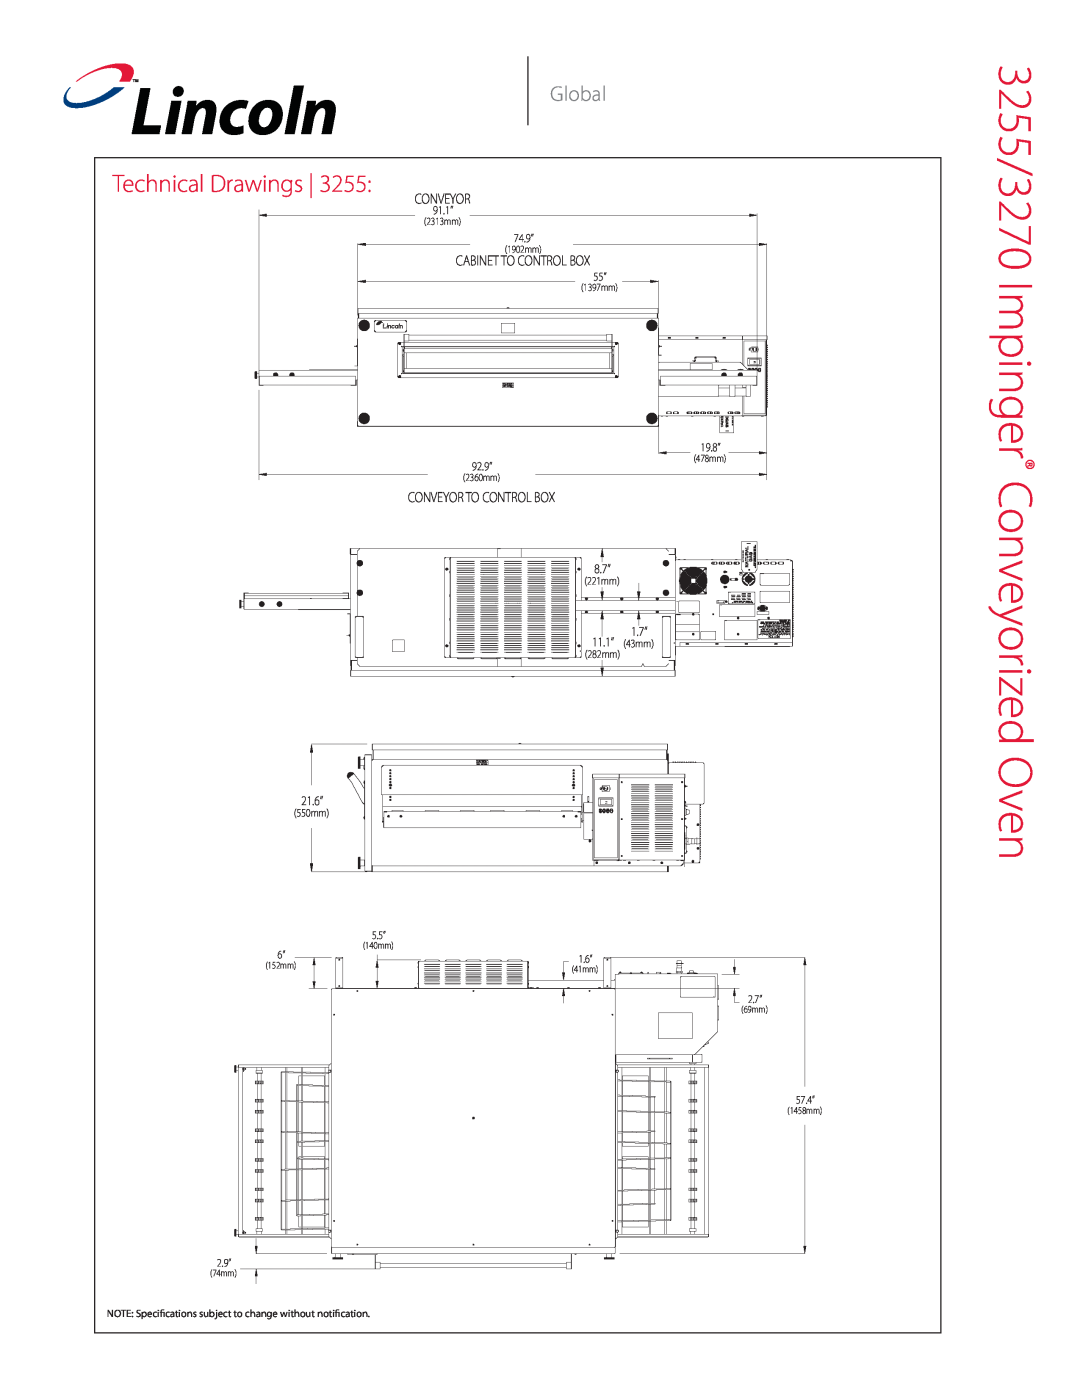 Lincoln manual Conveyorized Oven, Technical Drawings, Lincoln, 3255/3270 Impinger, Global 